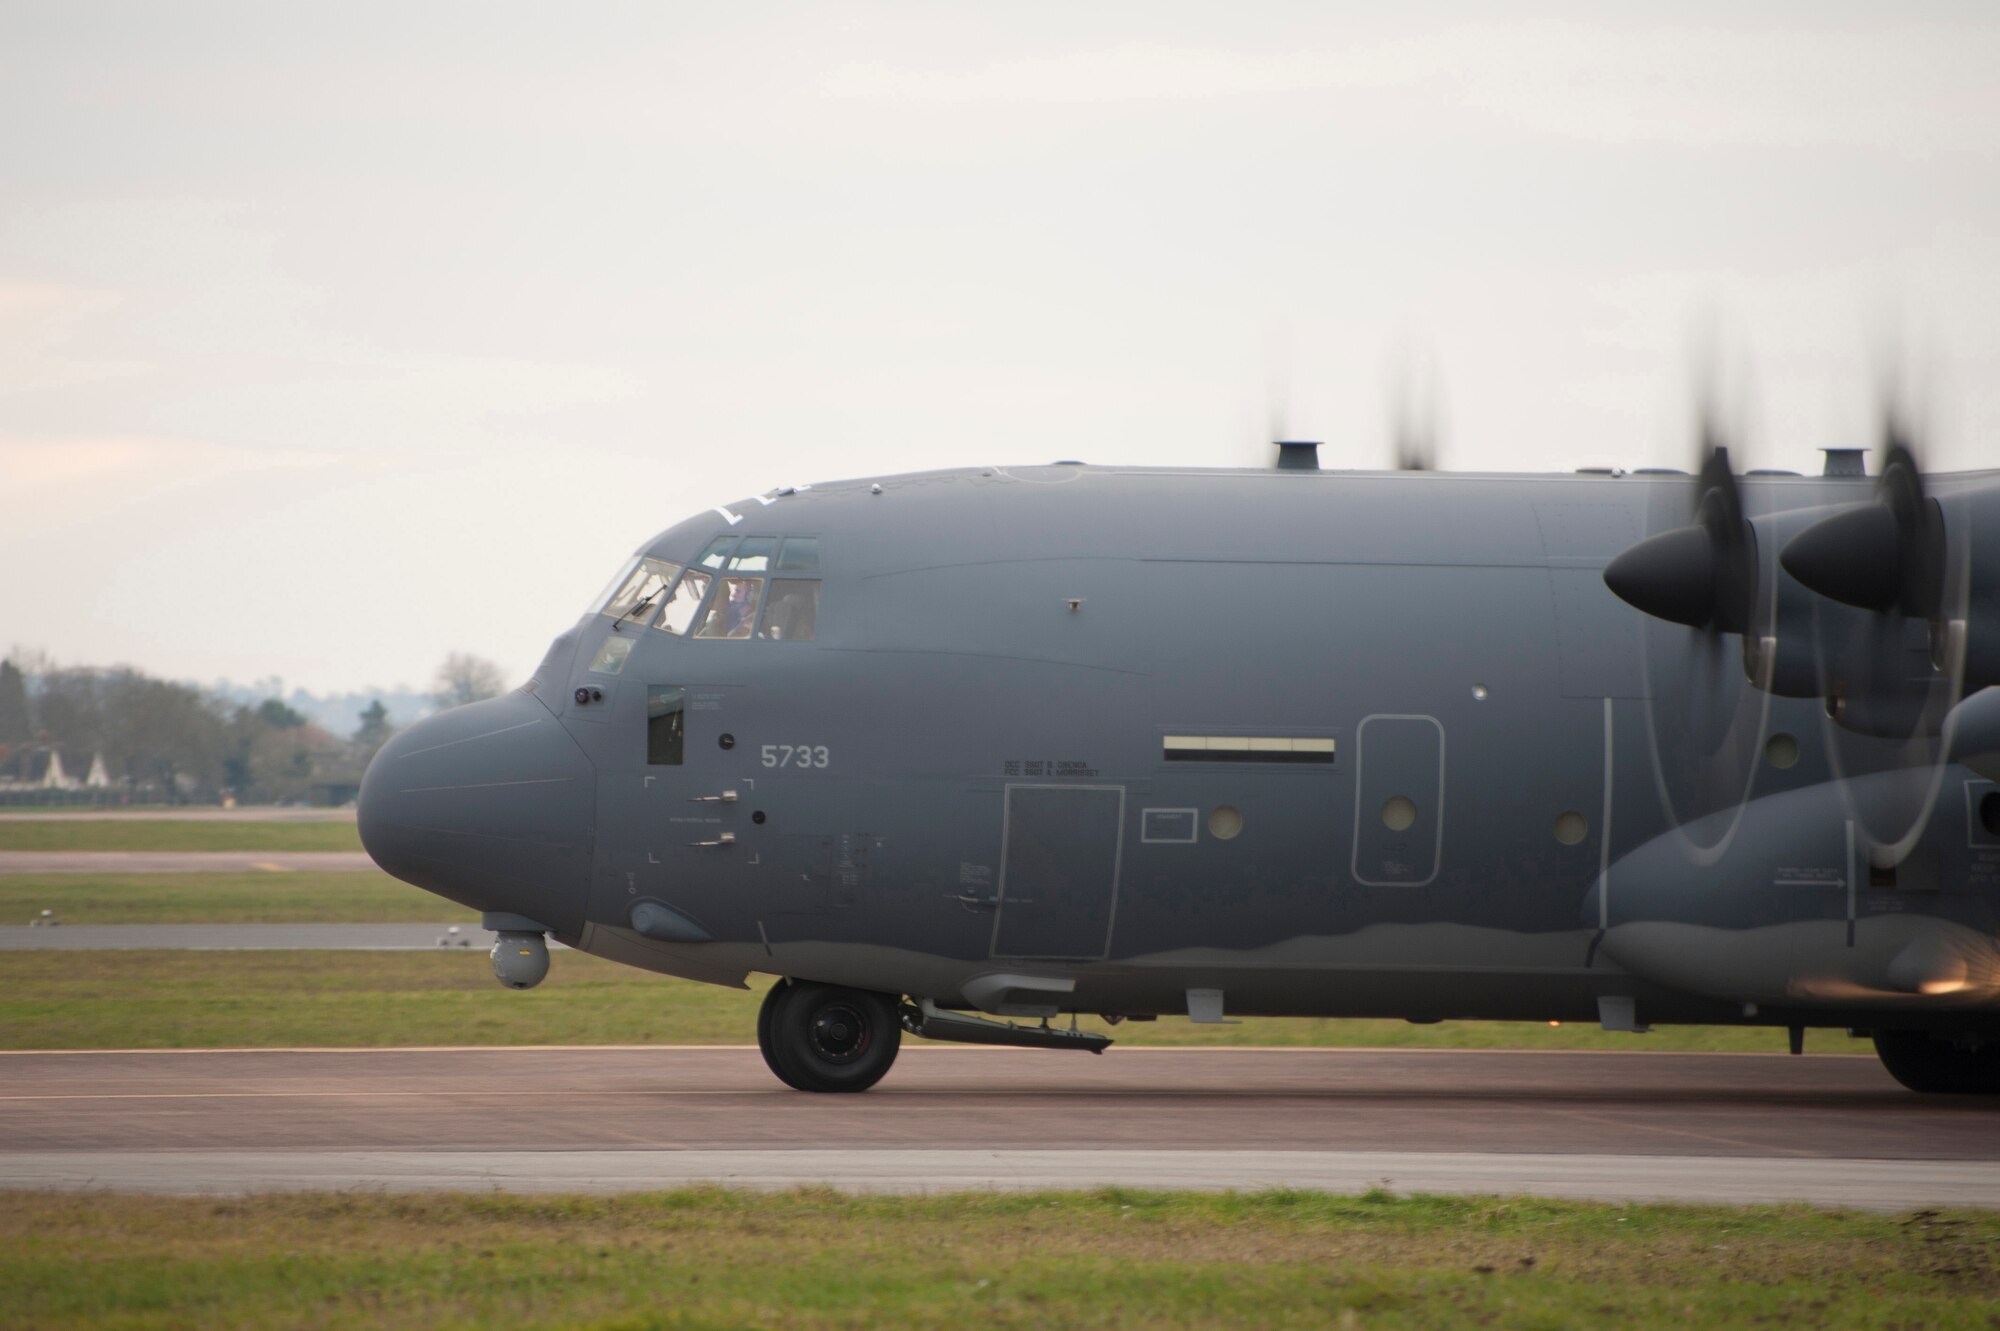 An MC-130J Commando II from the 67th Special Operations Squadron taxies during an exercise at RAF Fairford, England, Dec. 10, 2013. The exercise was designed to allow the 352nd Special Operations Group to practice and evaluate their ability to efficiently forward deploy the 352nd SOG’s newest assets, the CV-22 Osprey and MC-130J. (U.S. Air Force photo by Staff Sgt. Stephen Linch/Released)